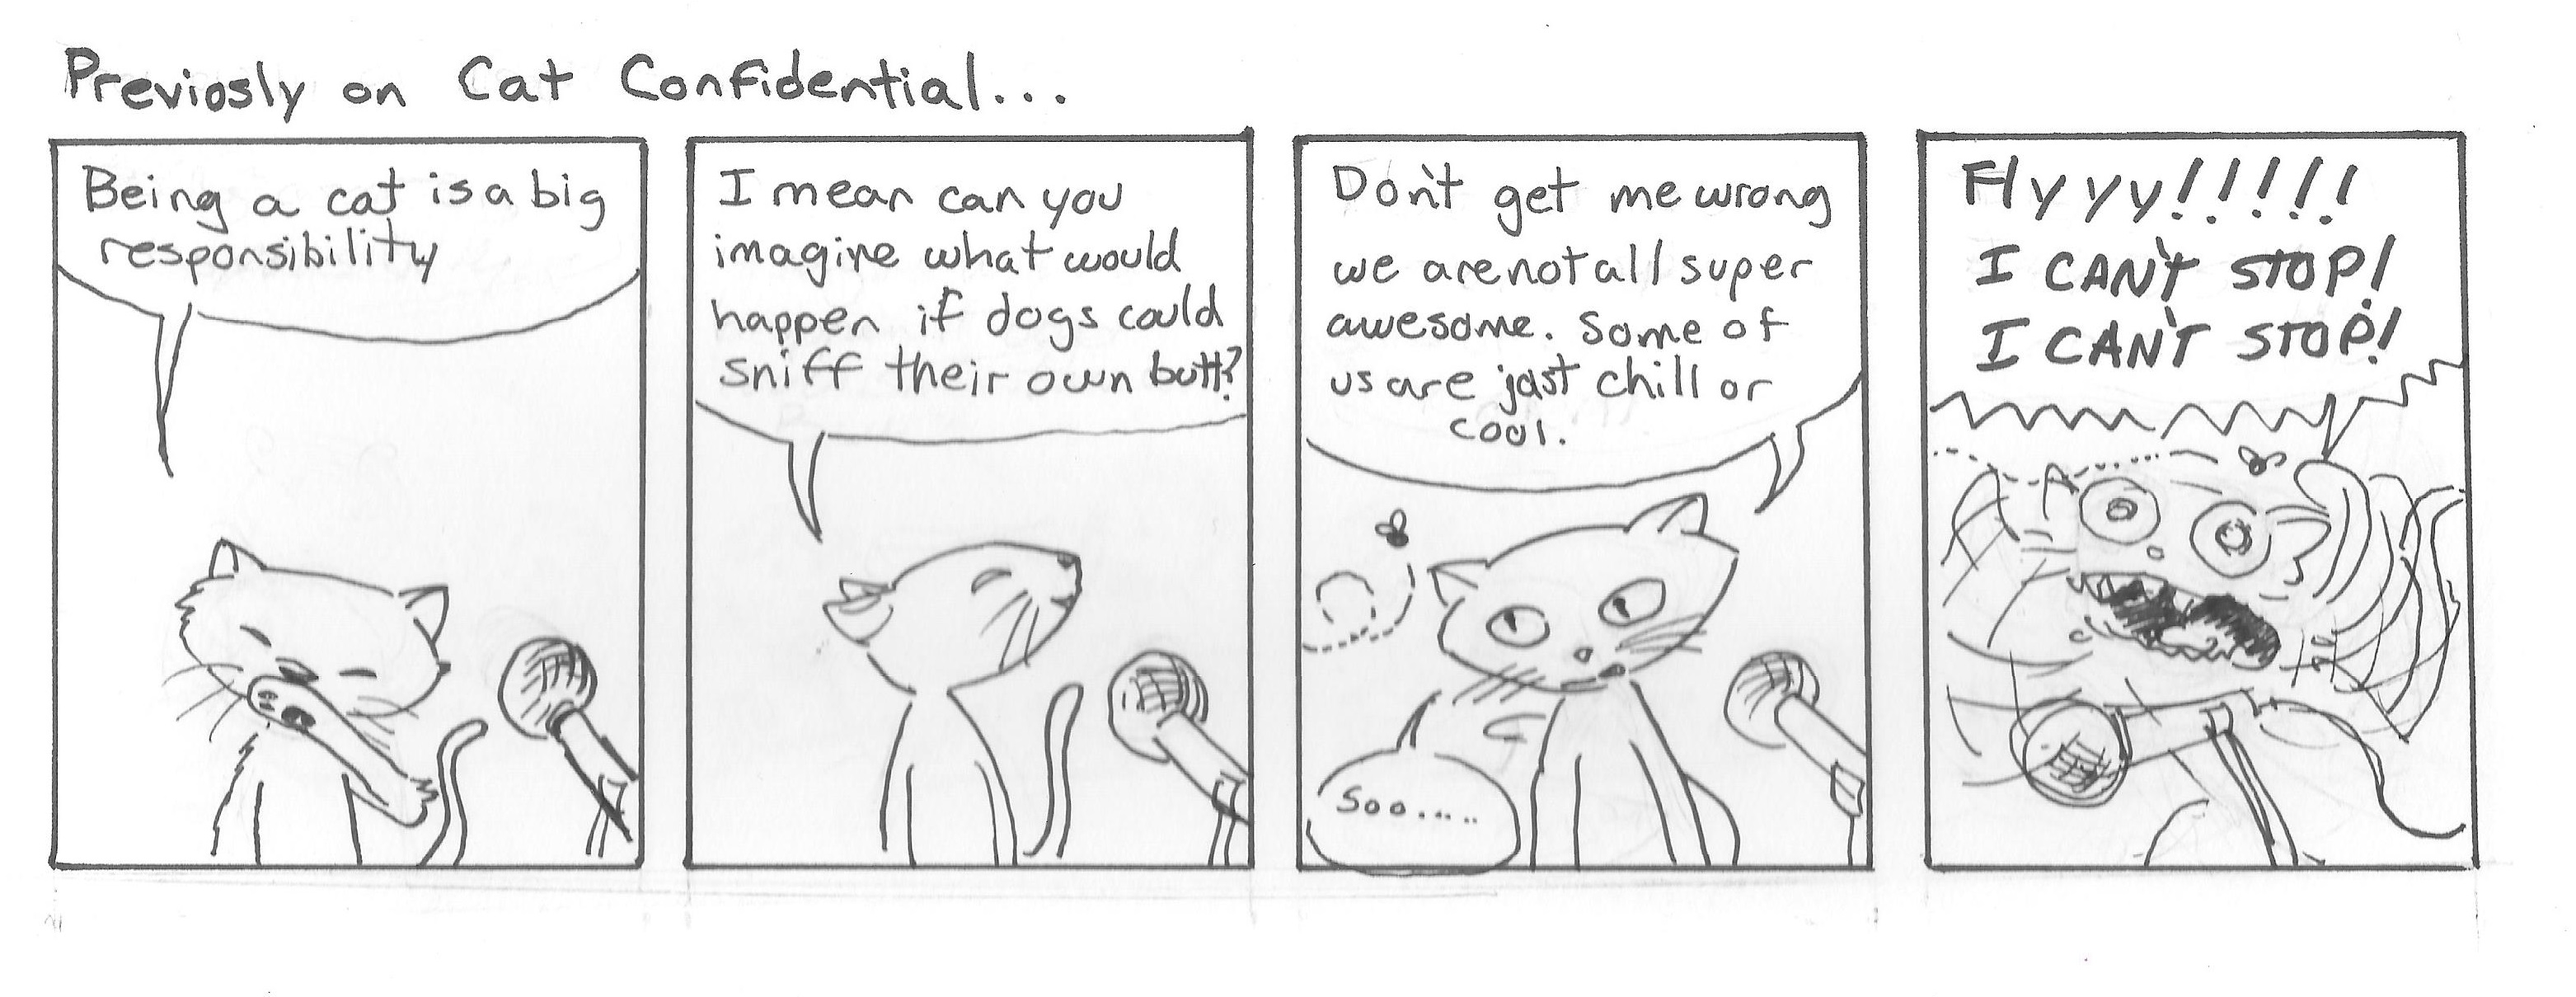 Previously on Cat Confidential...